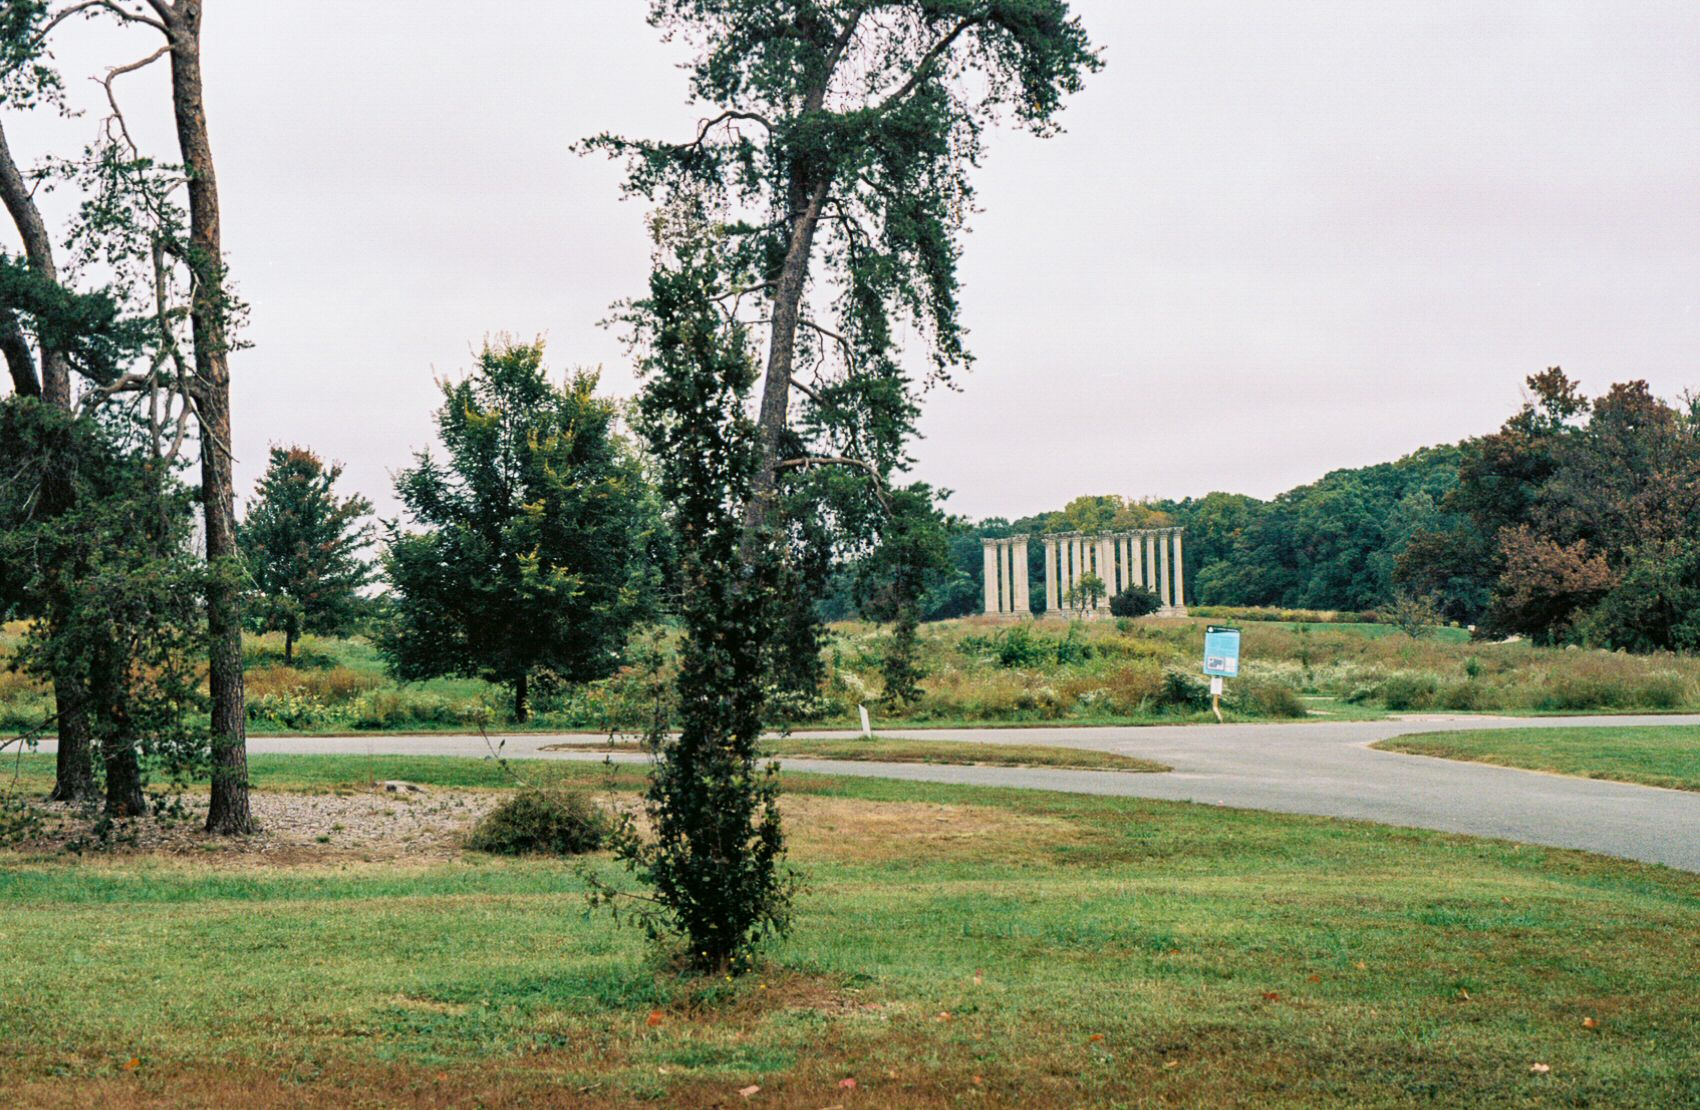 The U.S. National Arboretum. Grass and trees make up the foreground, while the National Capitol Columns stand in the distance.